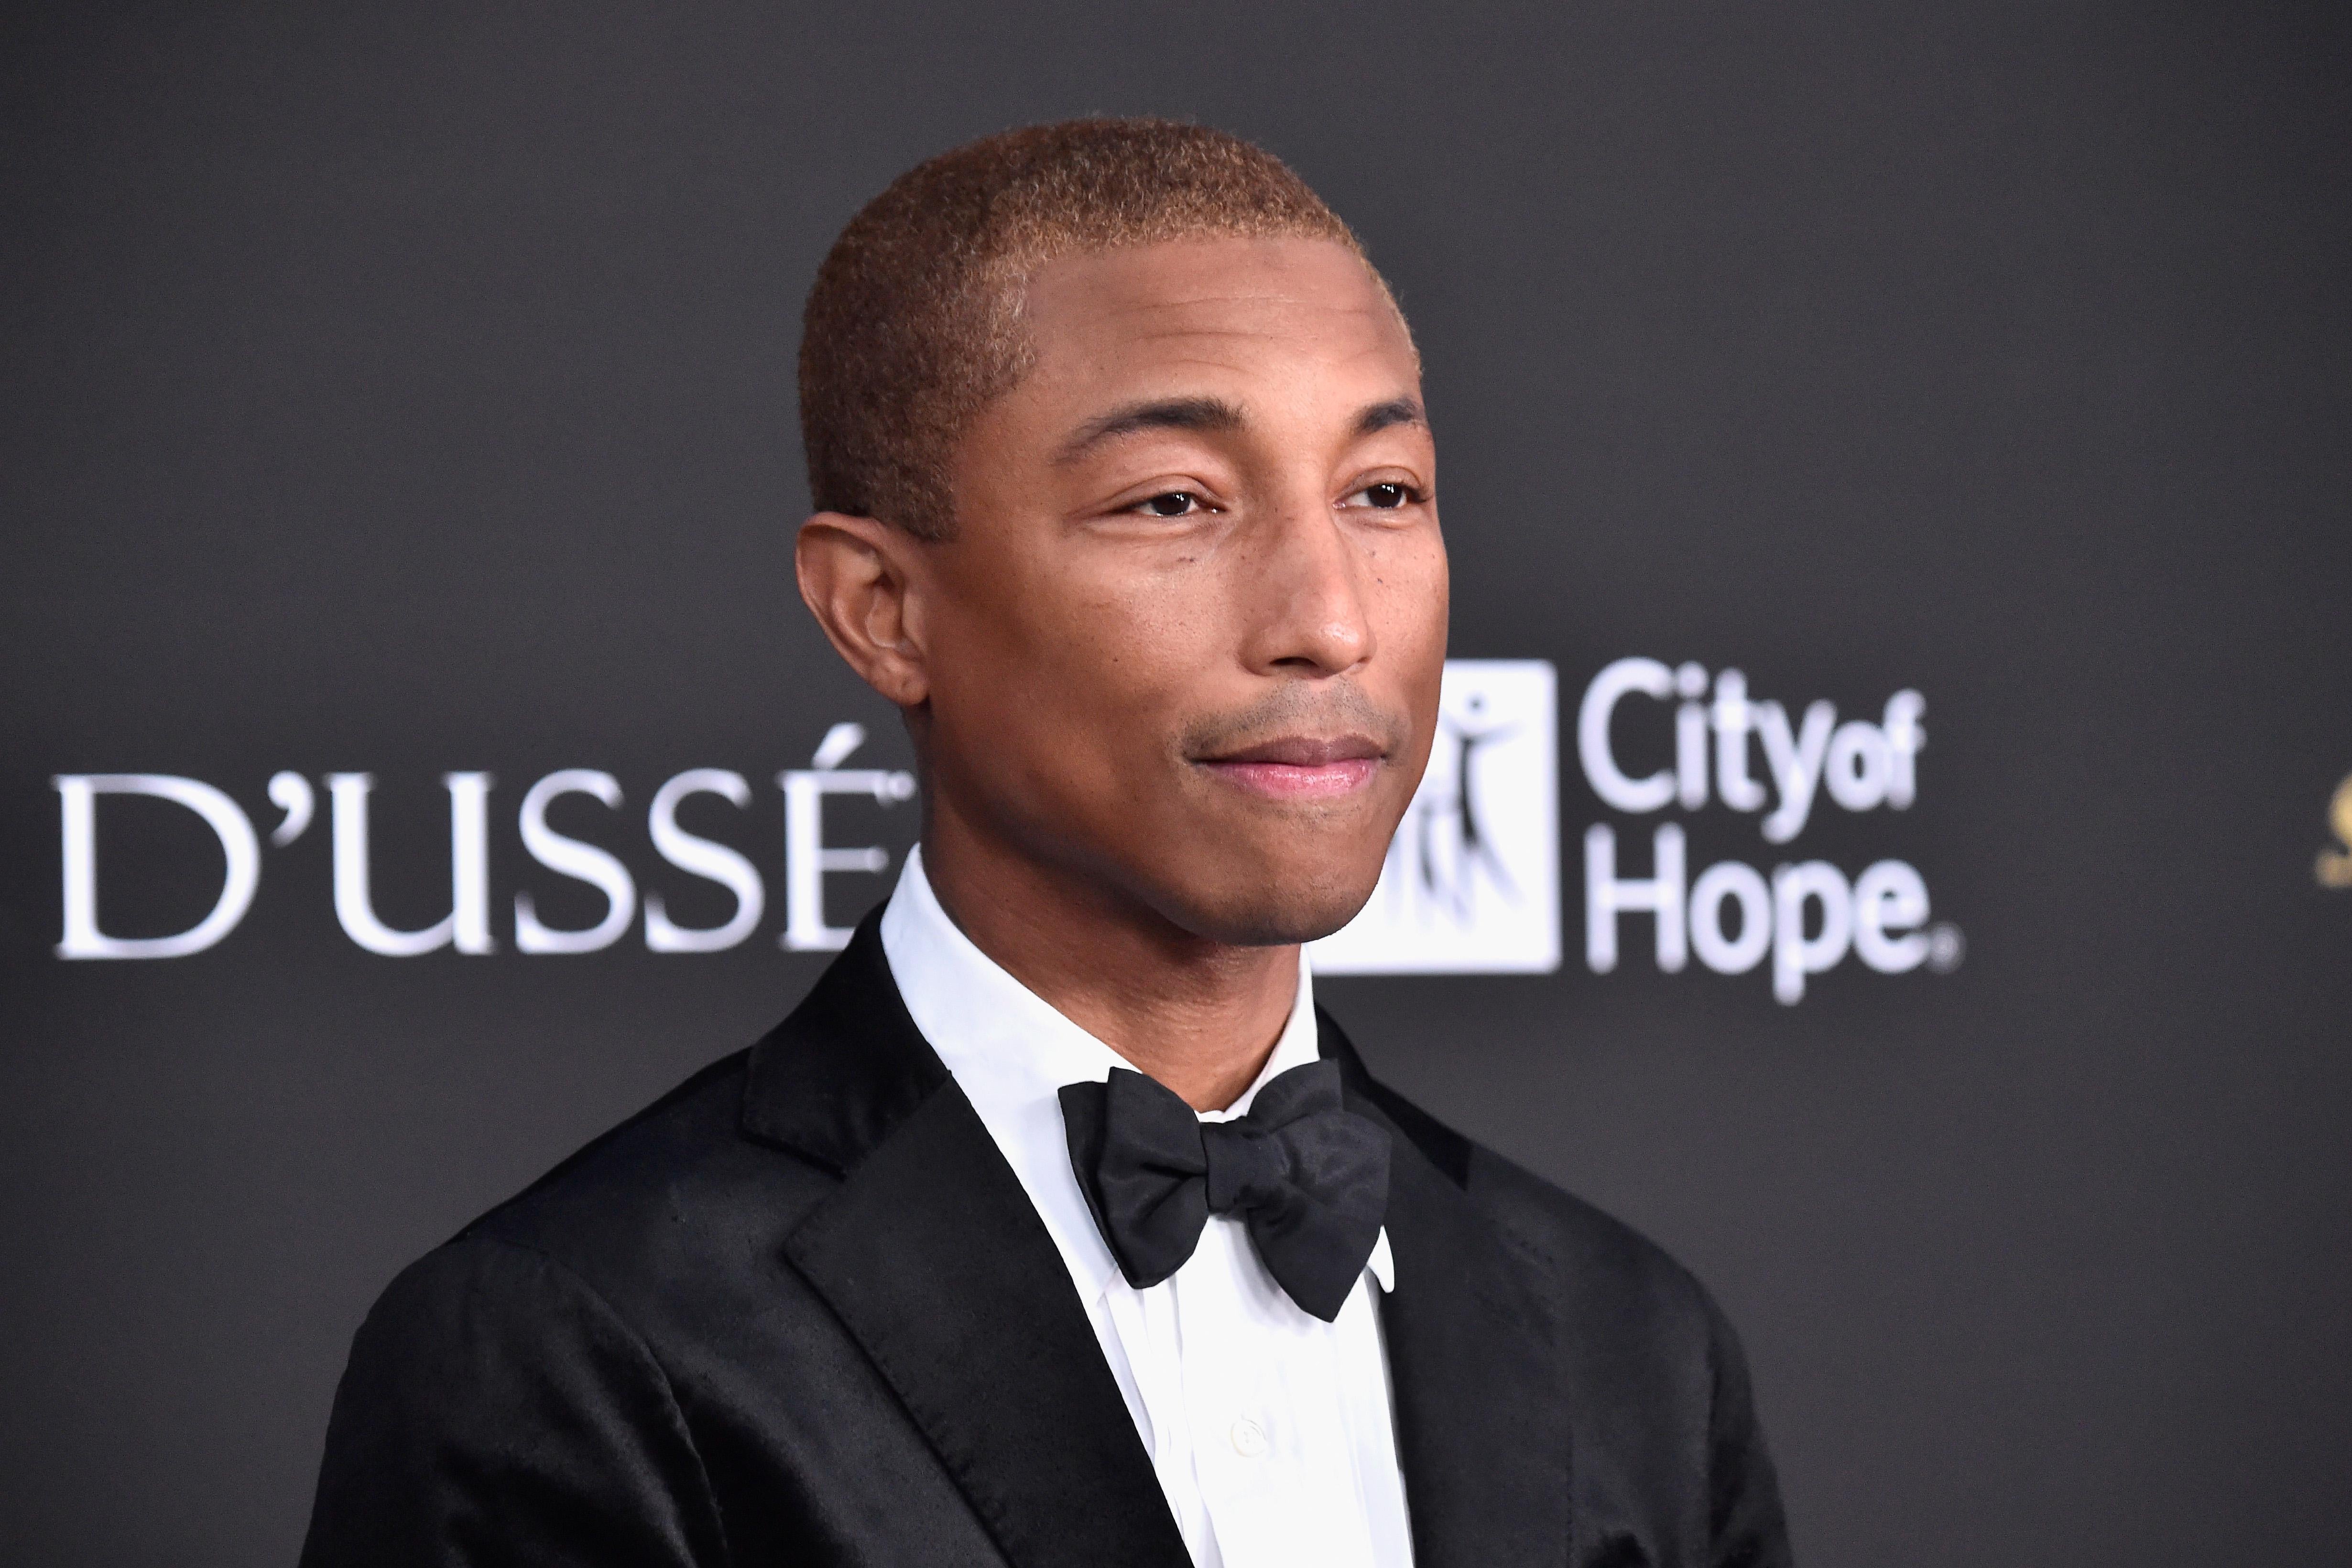 Pharrell Williams wears a black suit and bowtie.